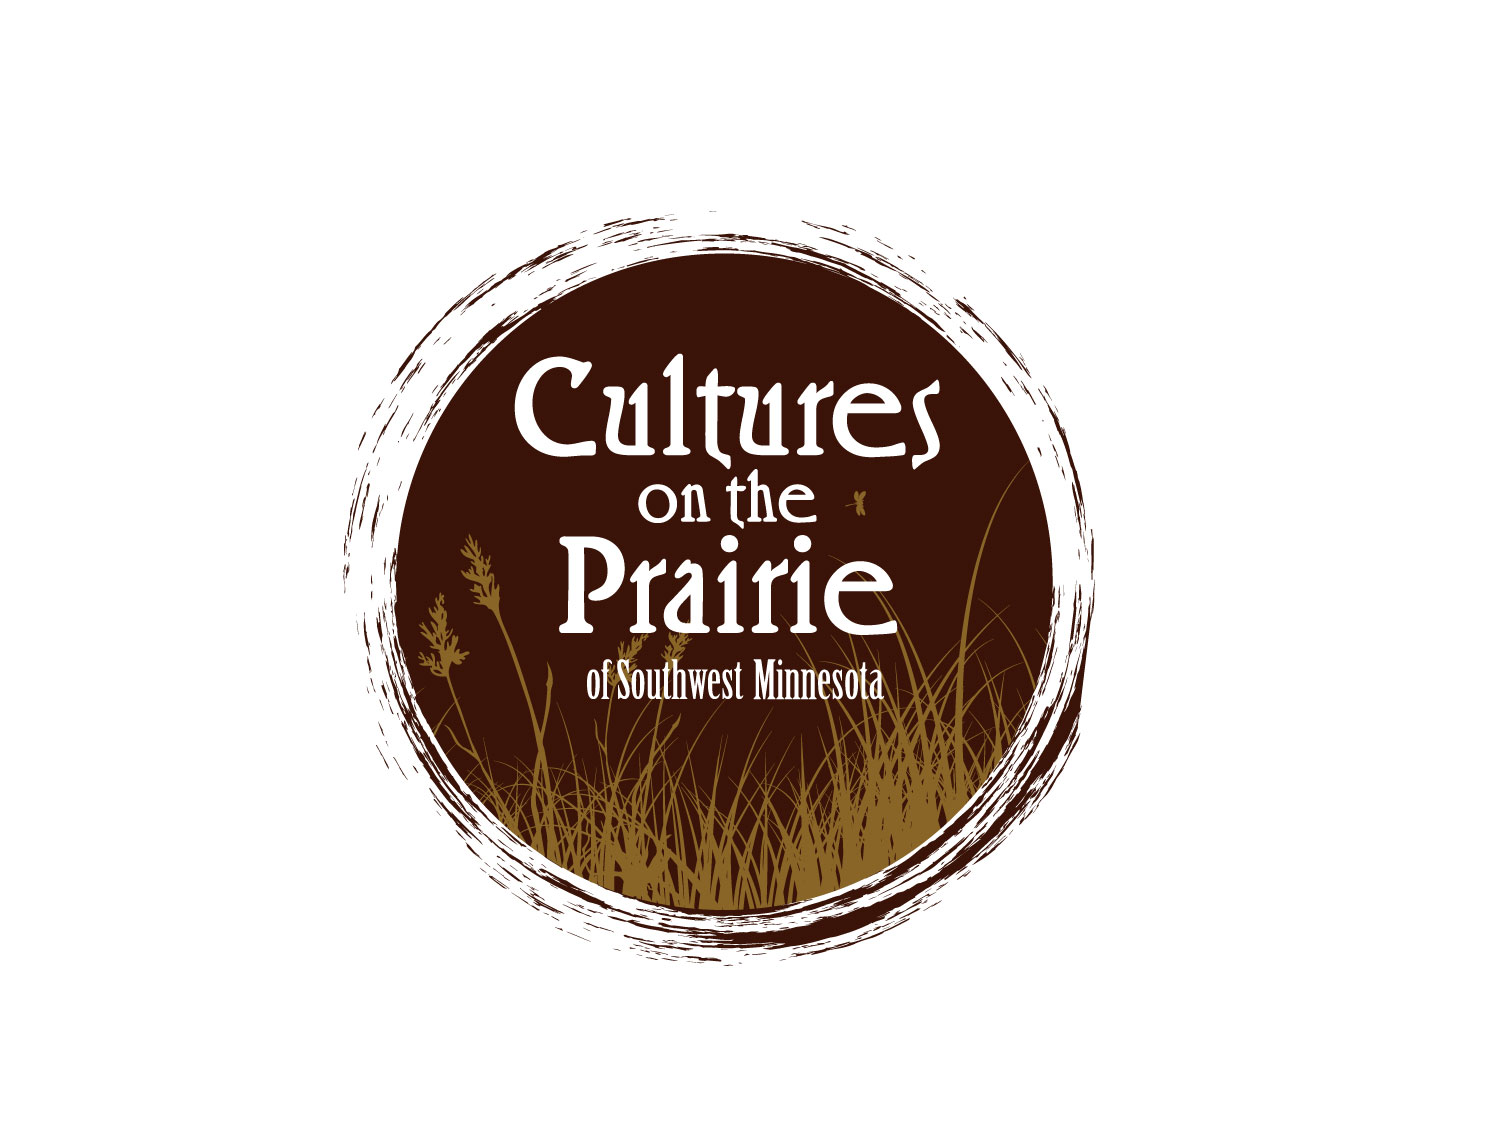 Cultures on the Prairie of Southwest Minnesota